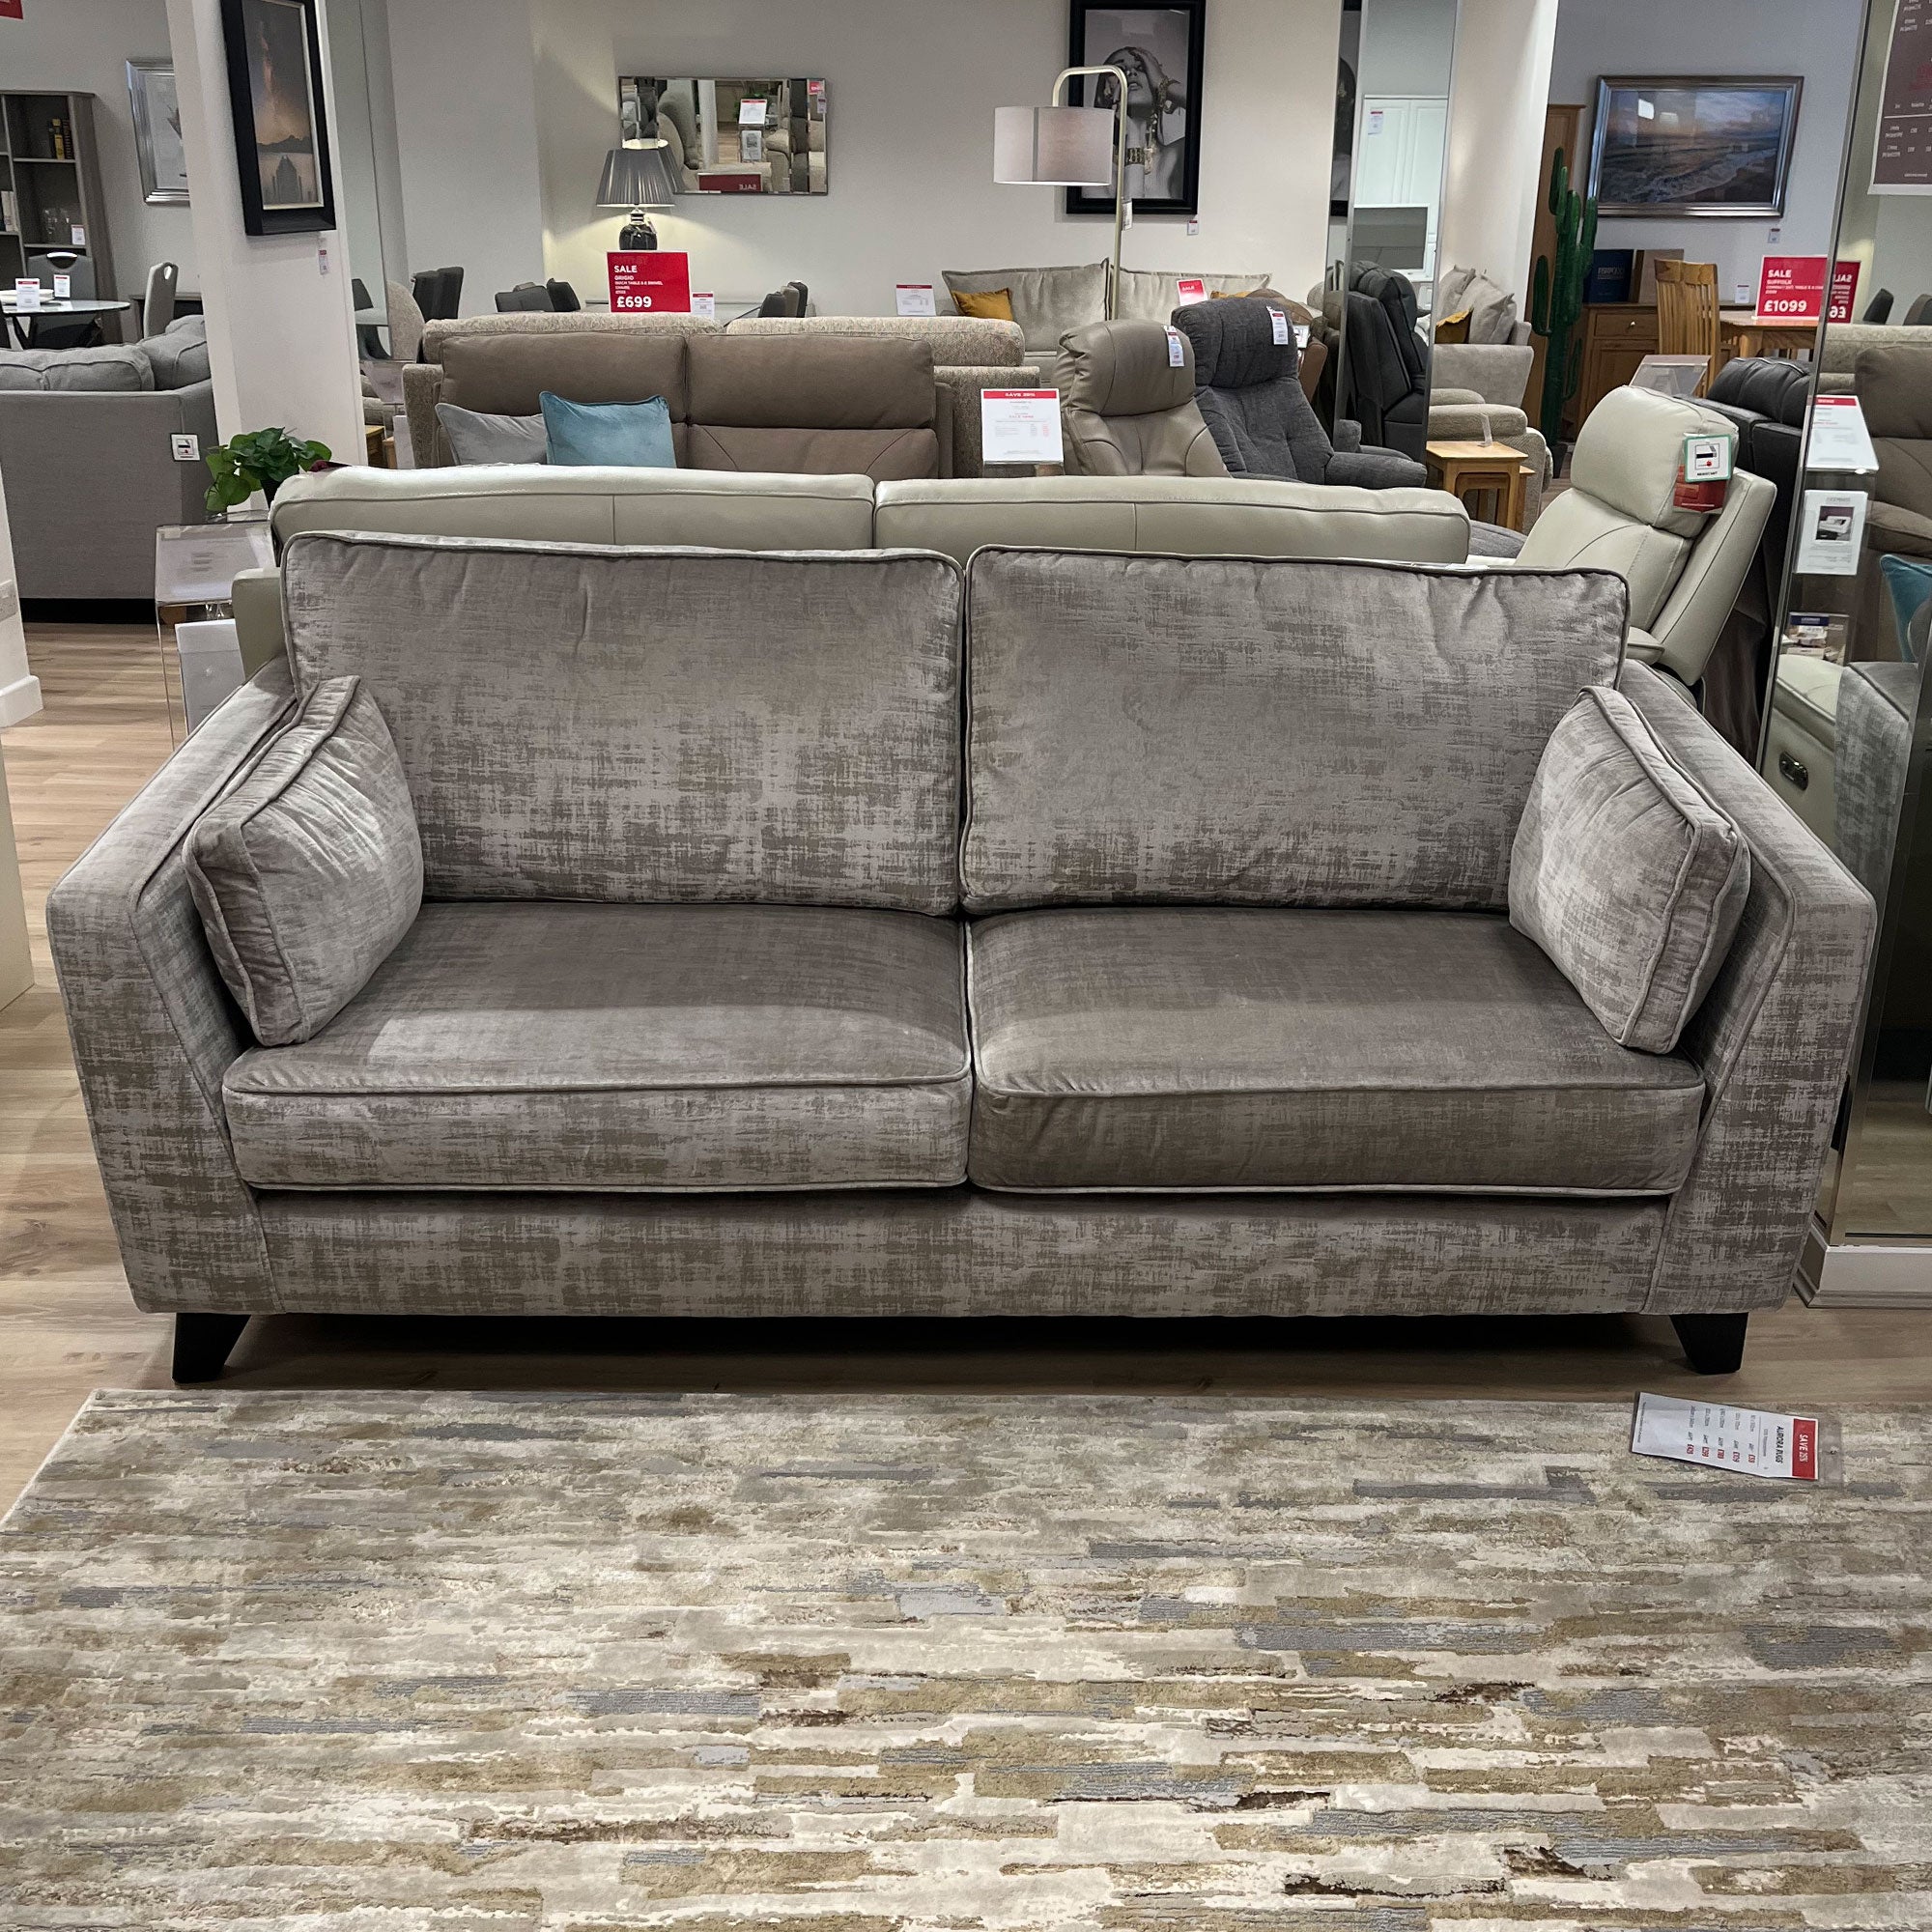 Cooper 3 Seat Sofa In Fabric Alessia Taupe With Dark Foot